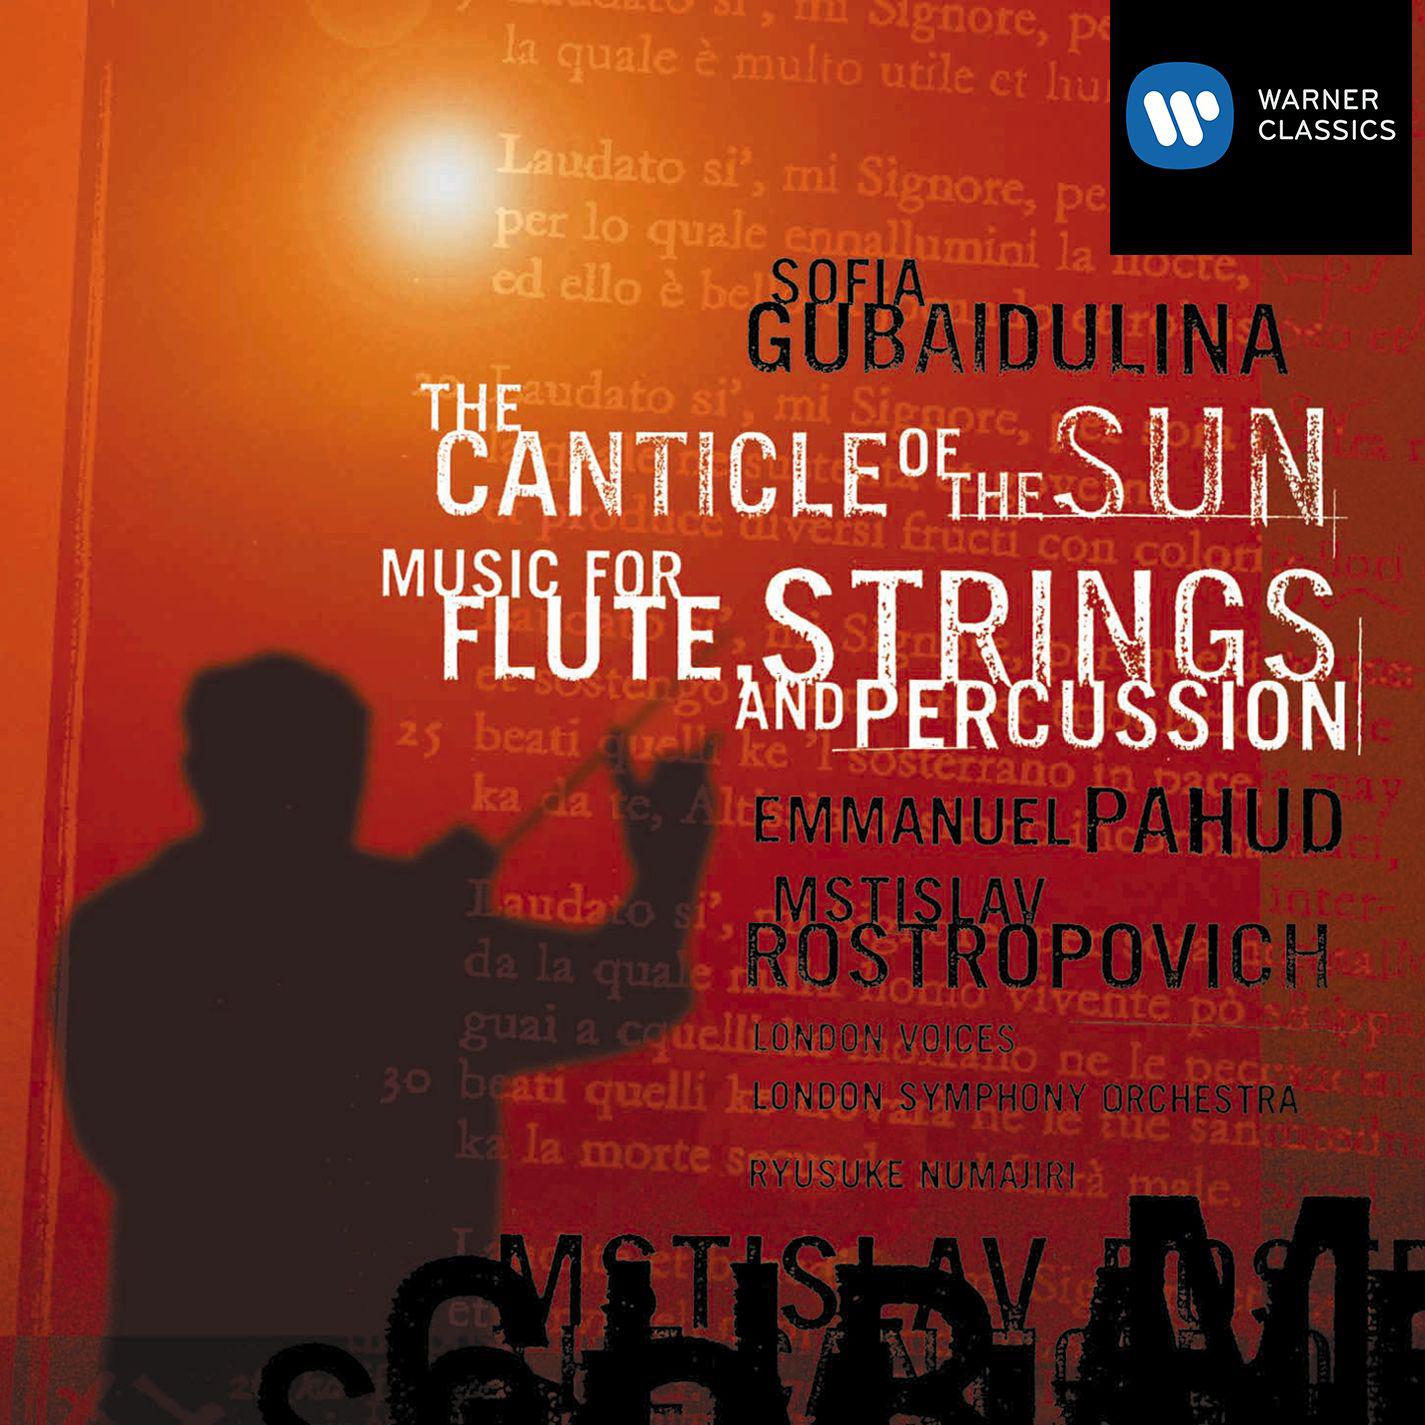 The Canticle of the Sun, for Cello, Chamber Choir and Percussion: No. 1a, Opening, "Altissimo omnipontente bon Signore"